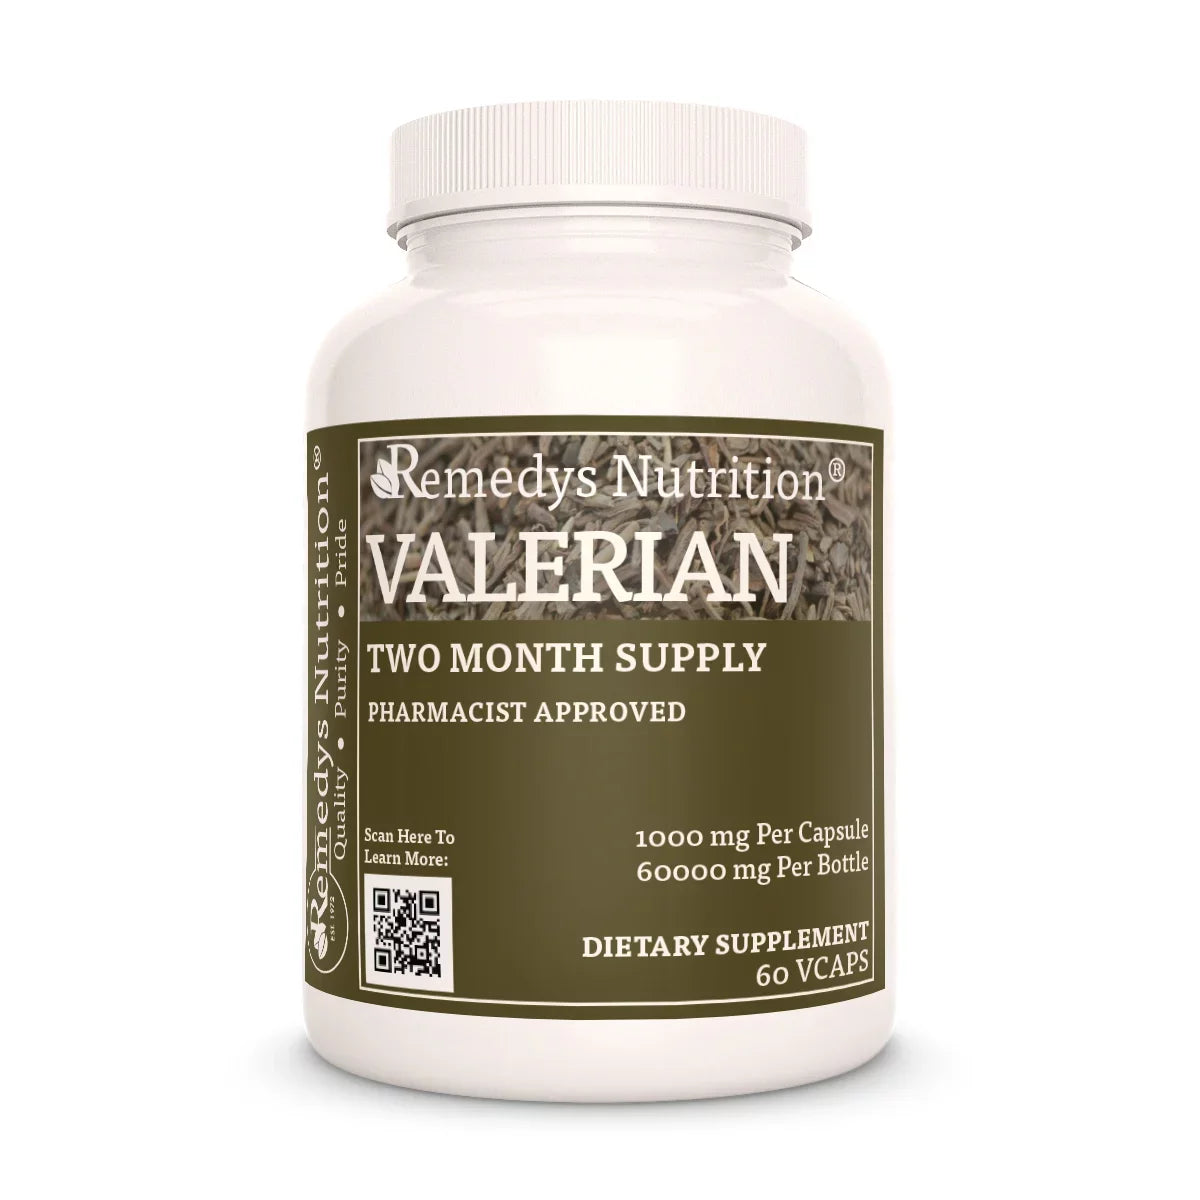 Image of Remedy's Nutrition® Valerian Root Capsules Herbal Dietary Supplement front bottle. Made in USA Valeriana officinalis